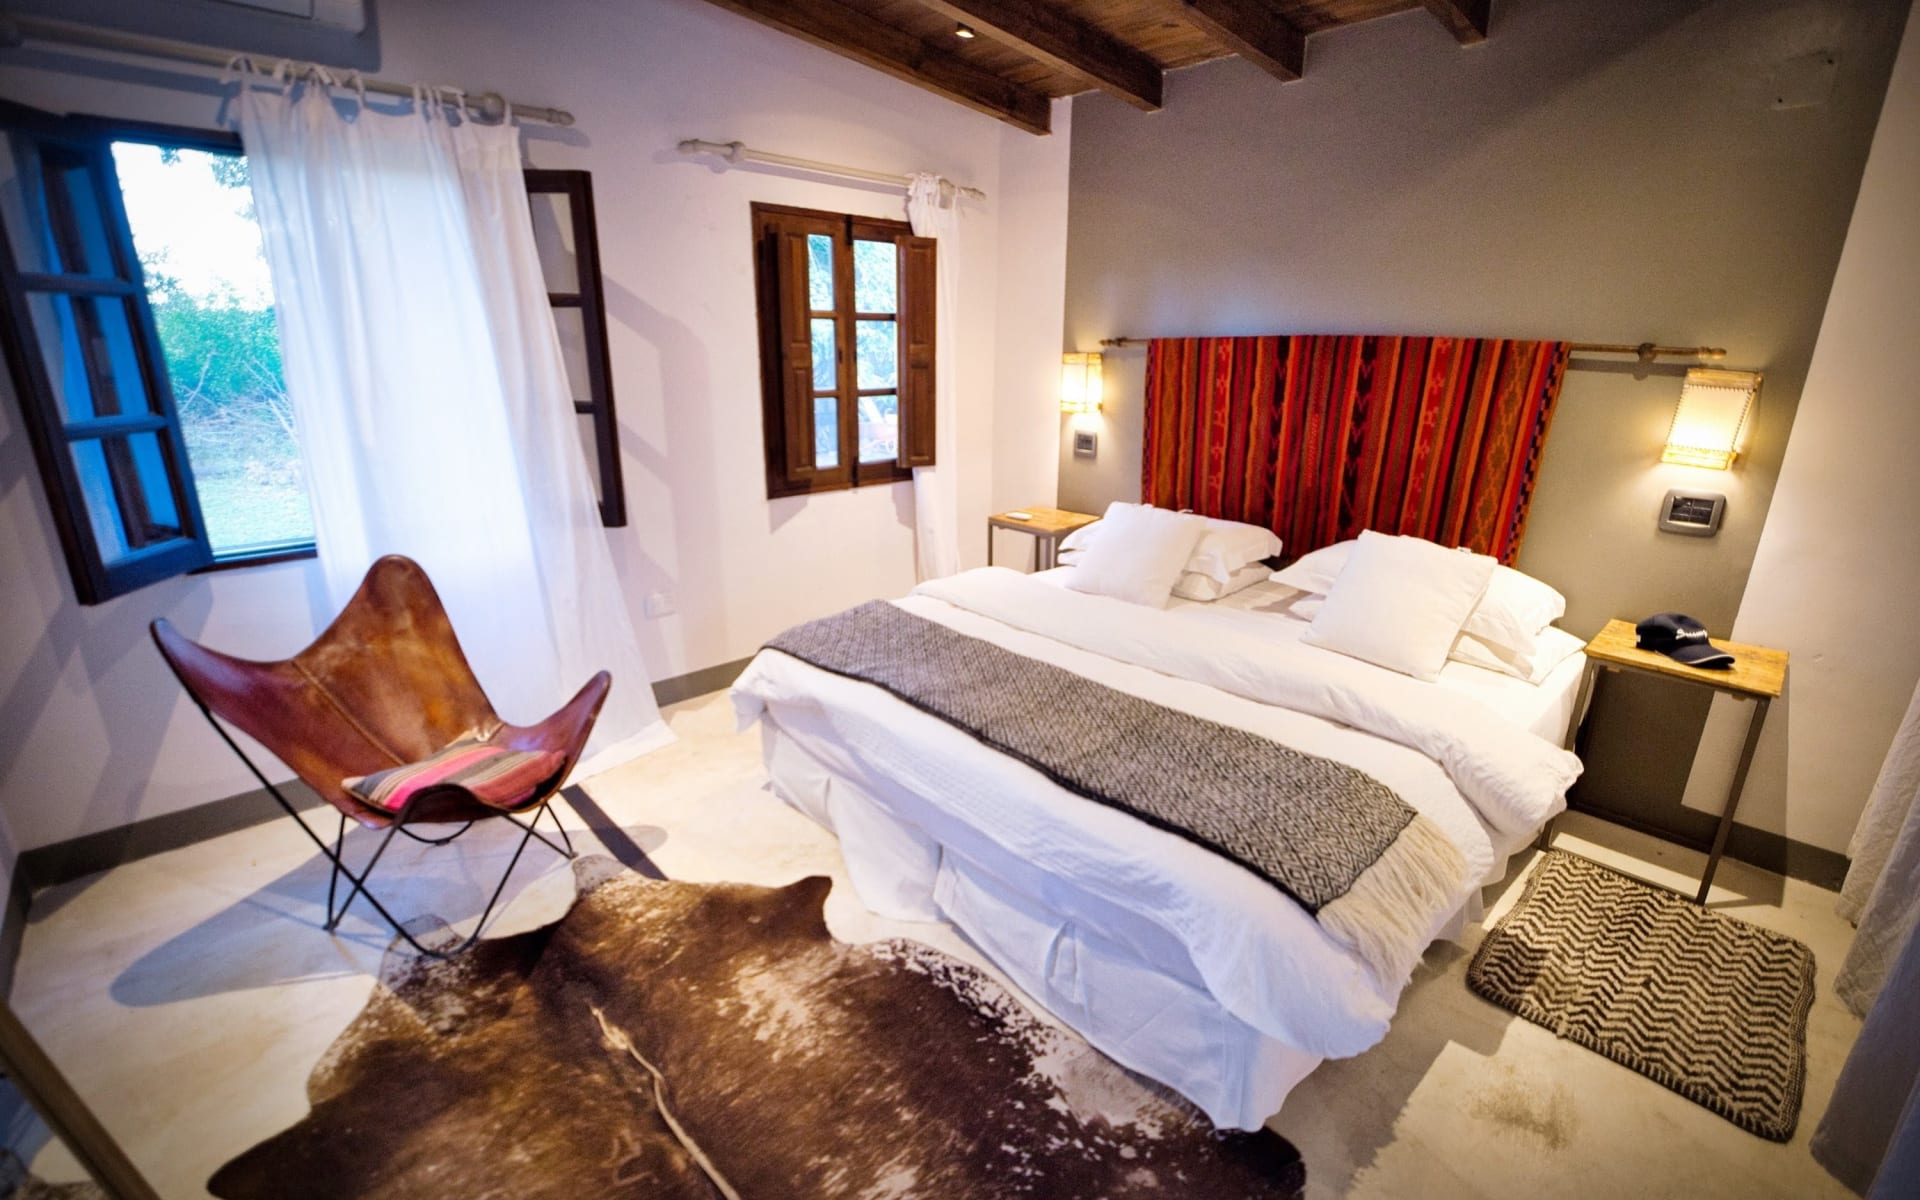 The rooms at Finca-Valentina are designed with a down-to-earth theme, with animal skin rugs, red tapestries, leather seats and low hanging lights.